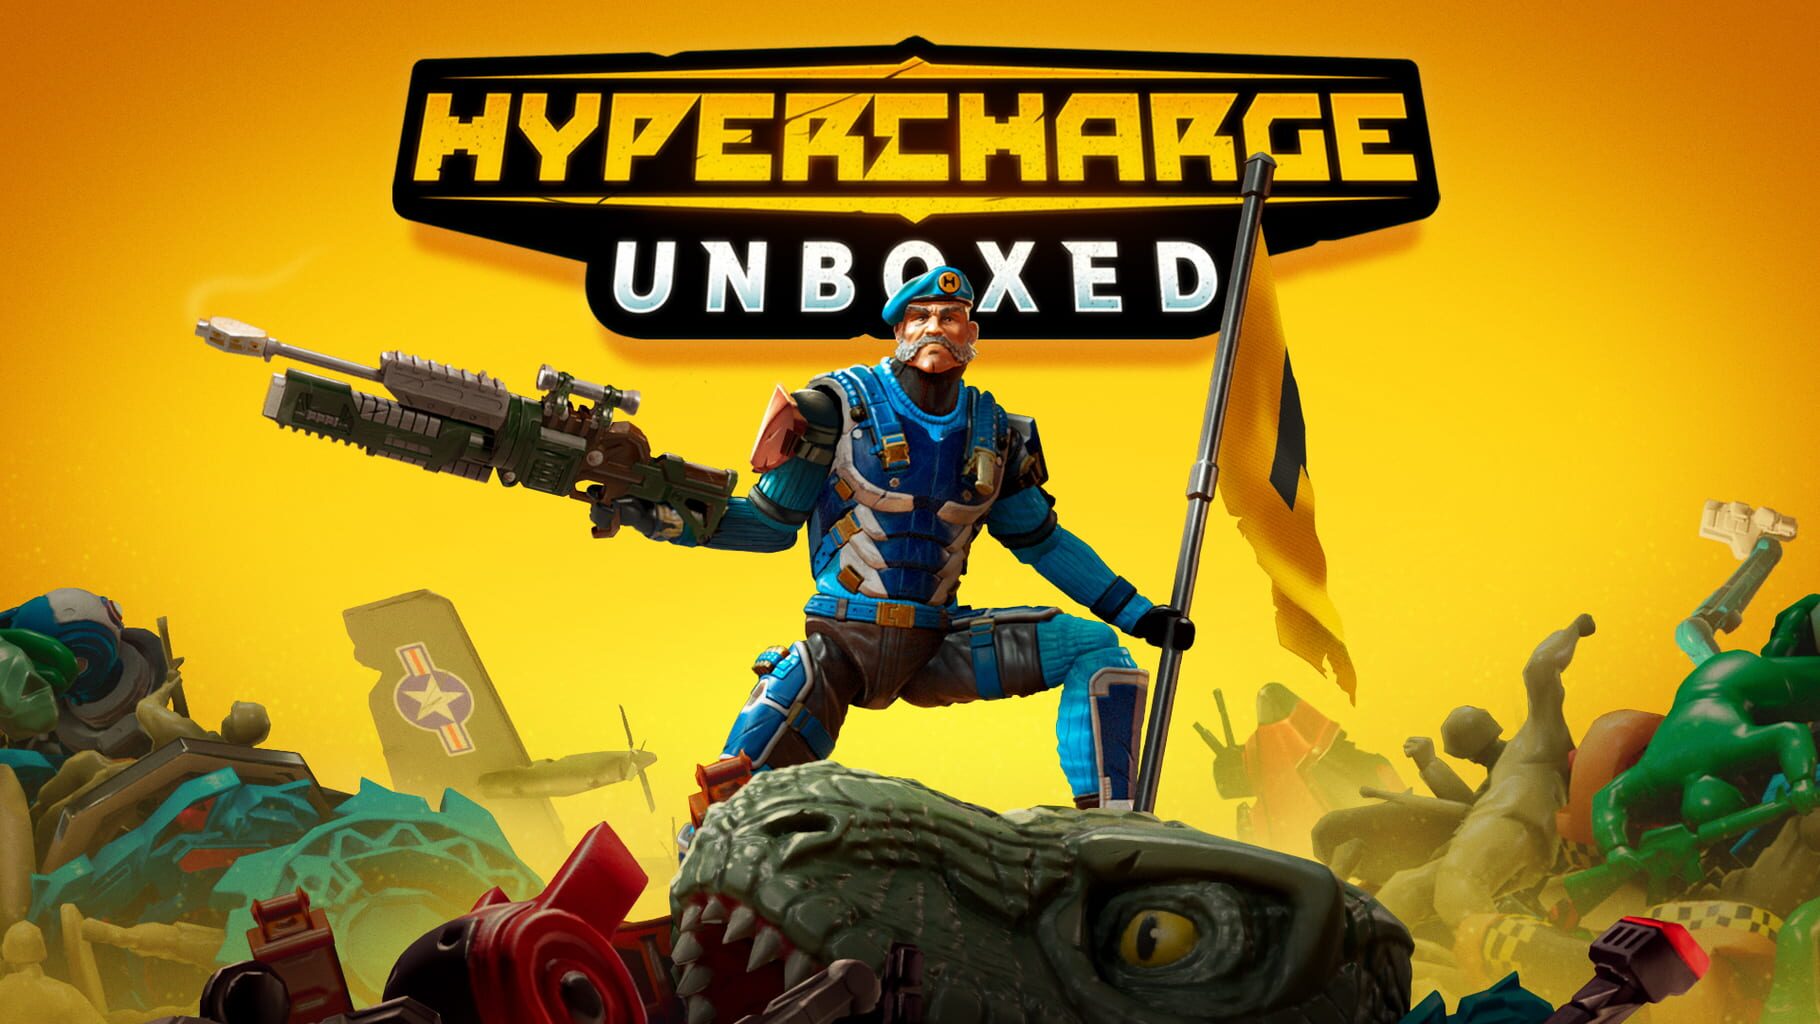 Artwork for Hypercharge: Unboxed